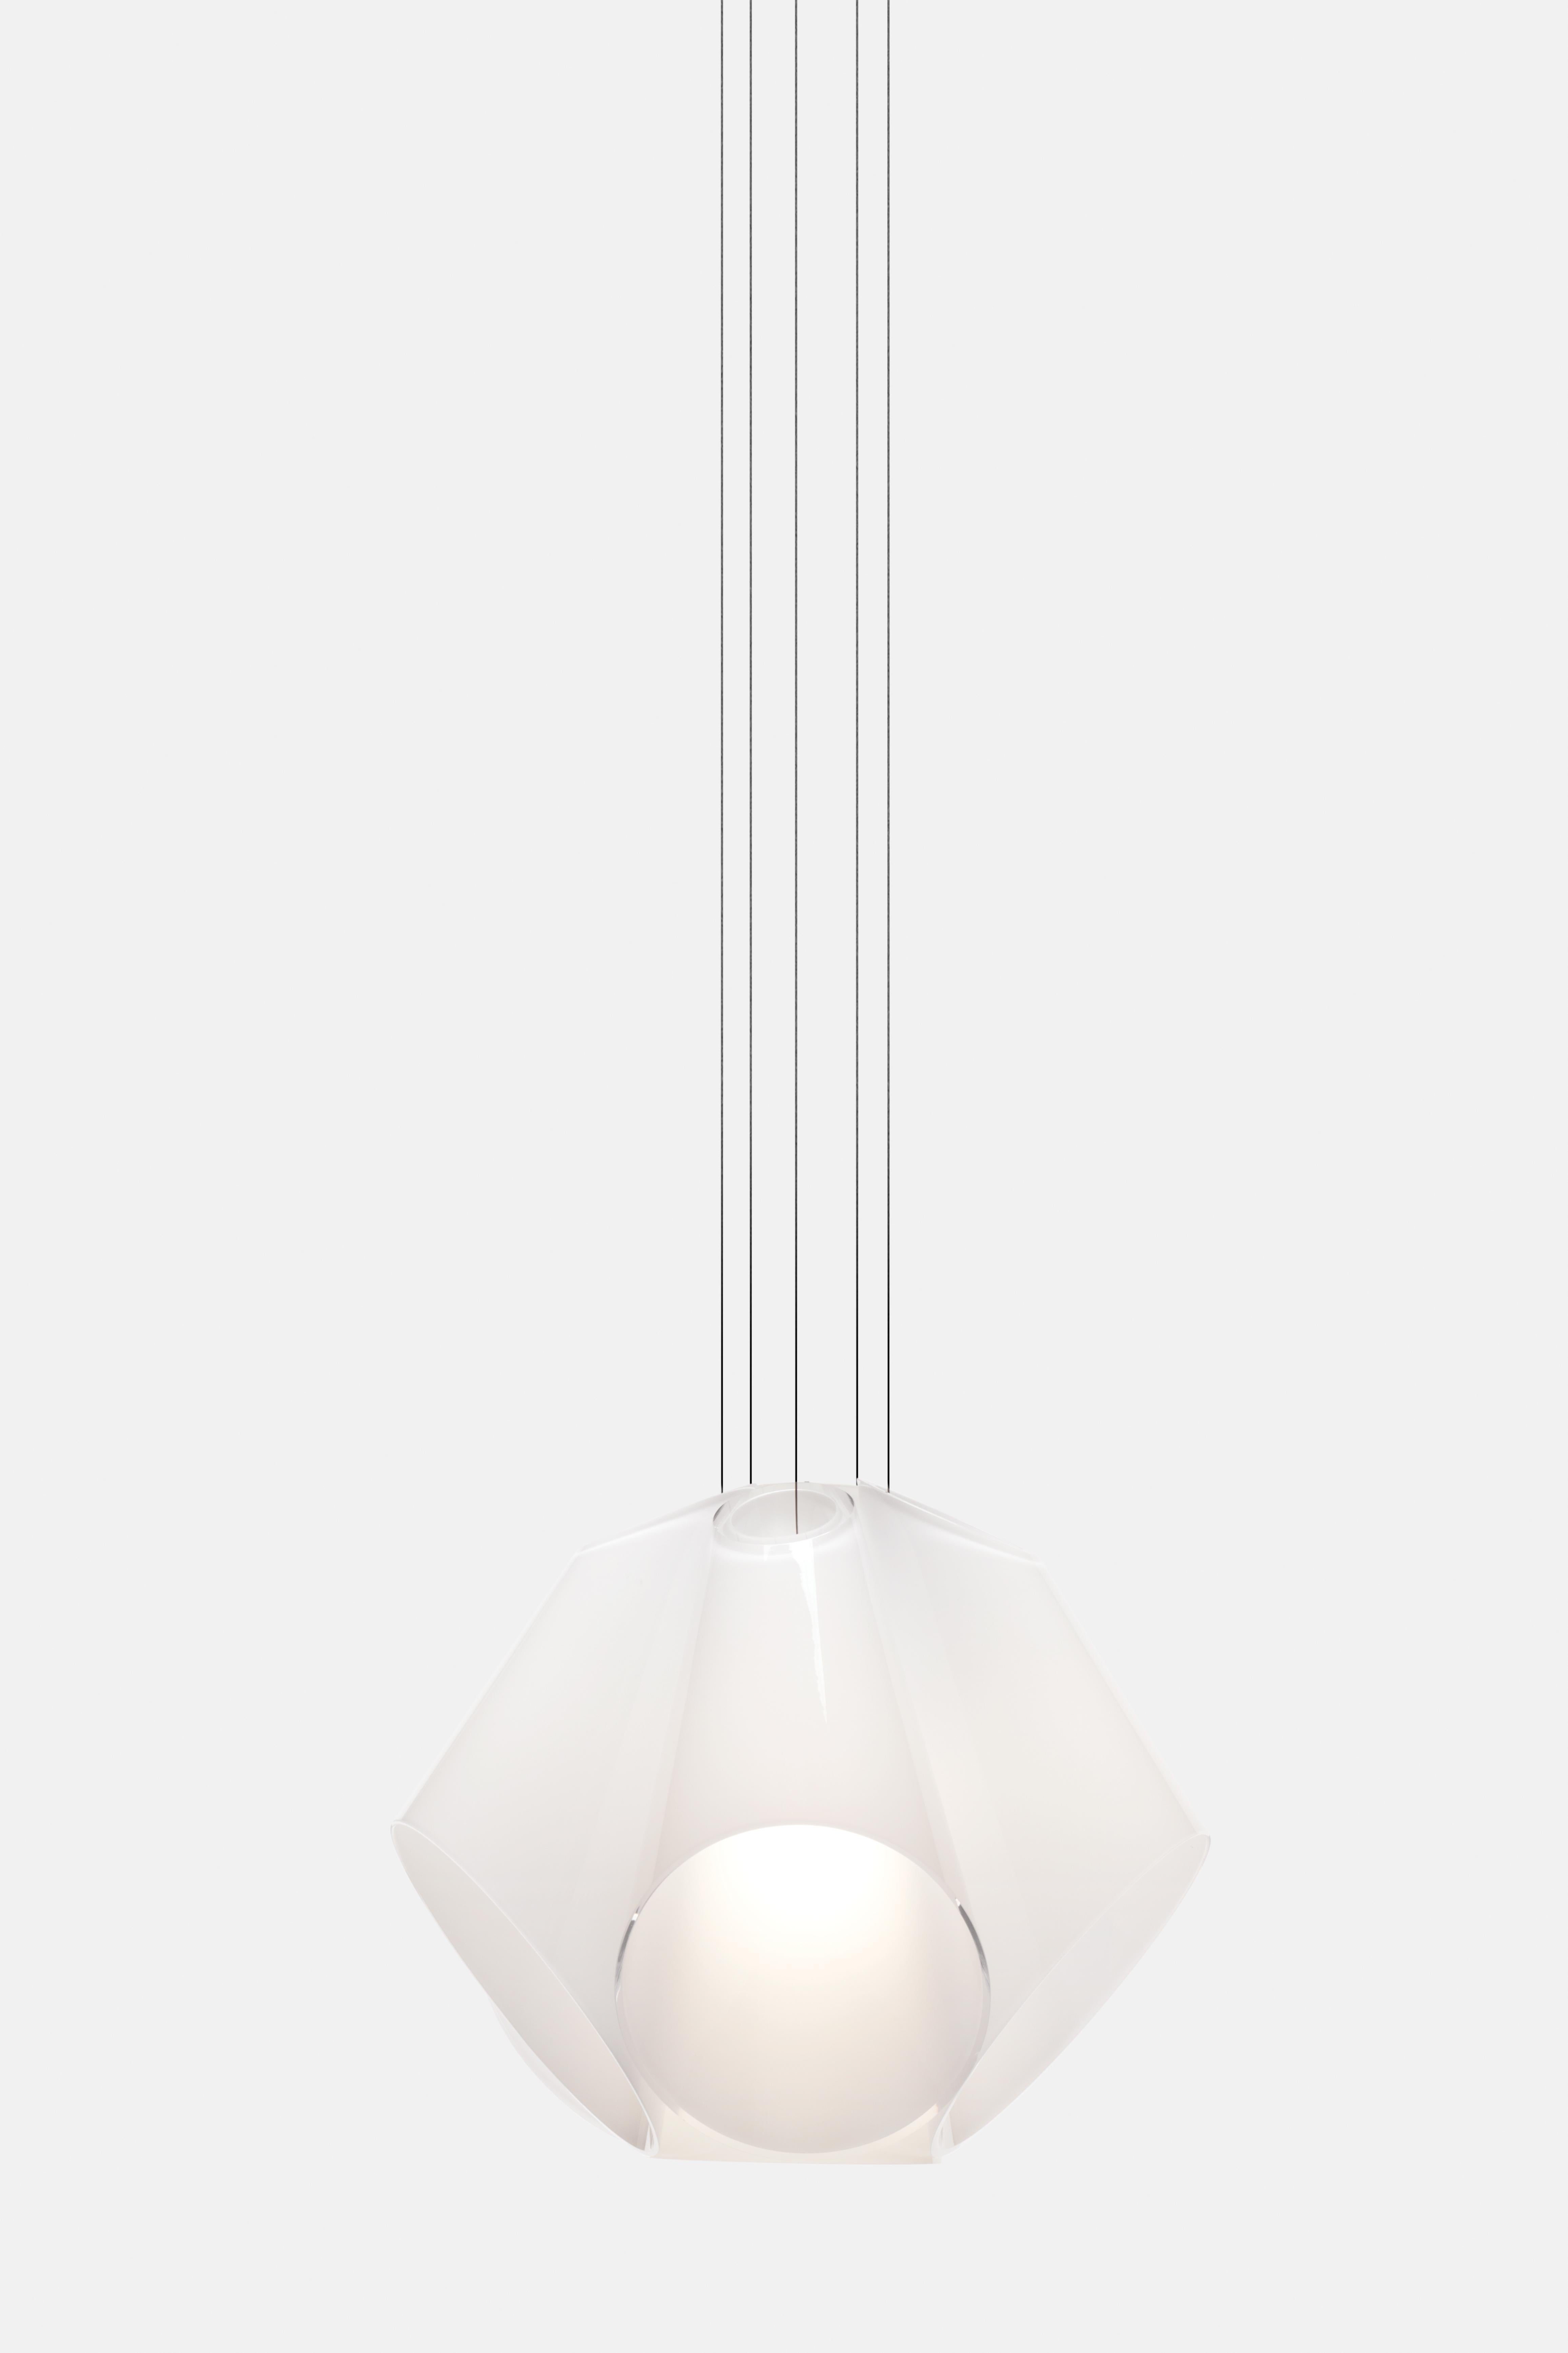 The Super Conic pendant light not only reveals details of the area it illuminates, it also adds its own delicate beauty to its surroundings. Made from a bouquet of white glass cones arranged around a light diffusing cone in the centre, the light